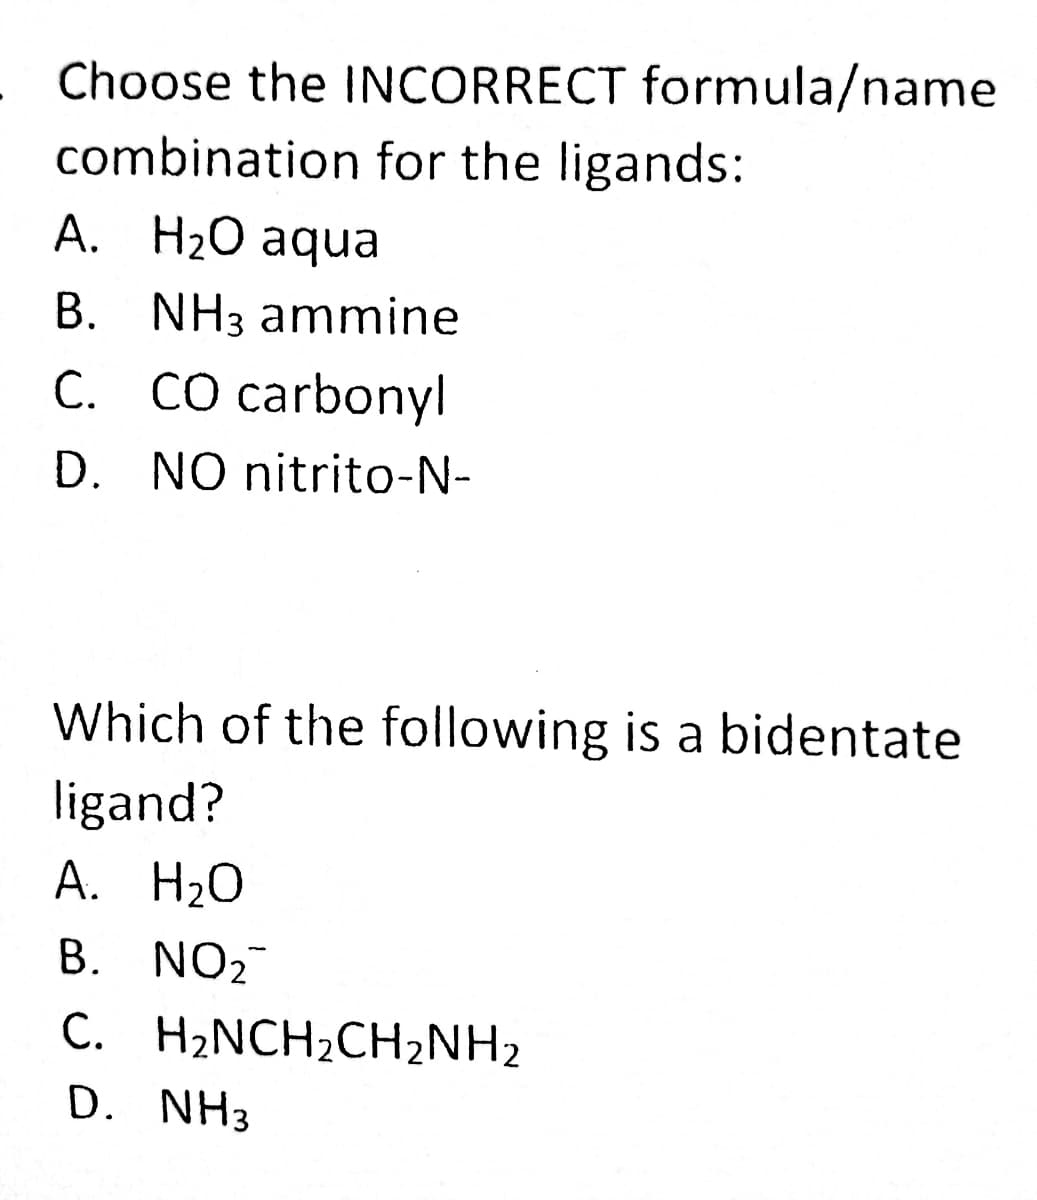 Choose the INCORRECT formula/name
combination for the ligands:
A. H2O aqua
B. NH3 ammine
C. CO carbonyl
D. NO nitrito-N-
Which of the following is a bidentate
ligand?
A. H20
B. NO2
C. H2NCH2CH2NH2
D. NH3
